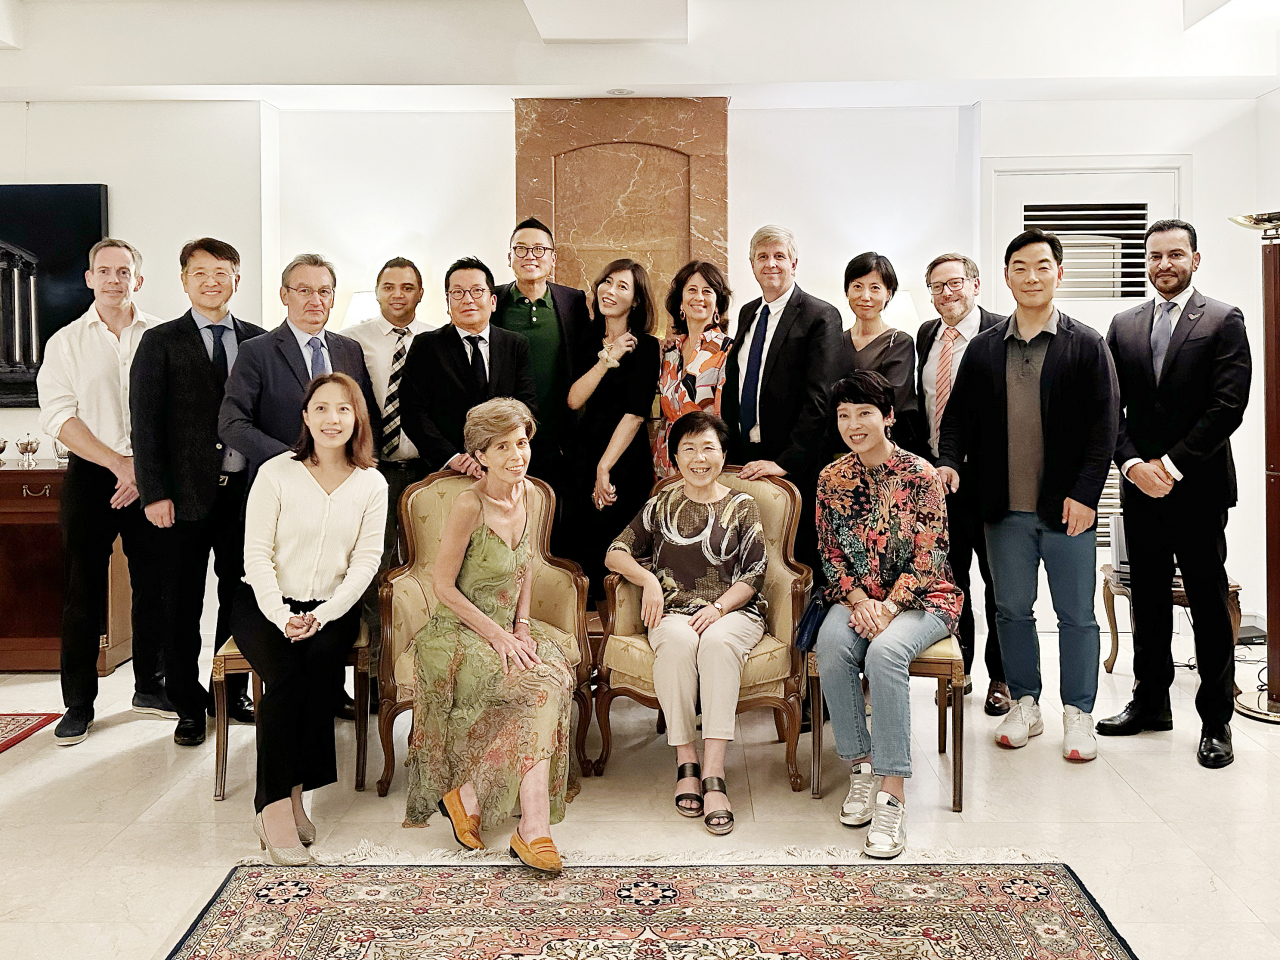 Greek Ambassador to Korea Ekaterini Loupas (second from left, first row) and Choi Jung-hwa, president of the Corea Image Communication Institute (CICI) (second from right, first row) pose for a group photo with attendees at an event focusing on cultural diplomacy at her residence in Seongbuk-gu, Seoul, on Tuesday. (CICI)